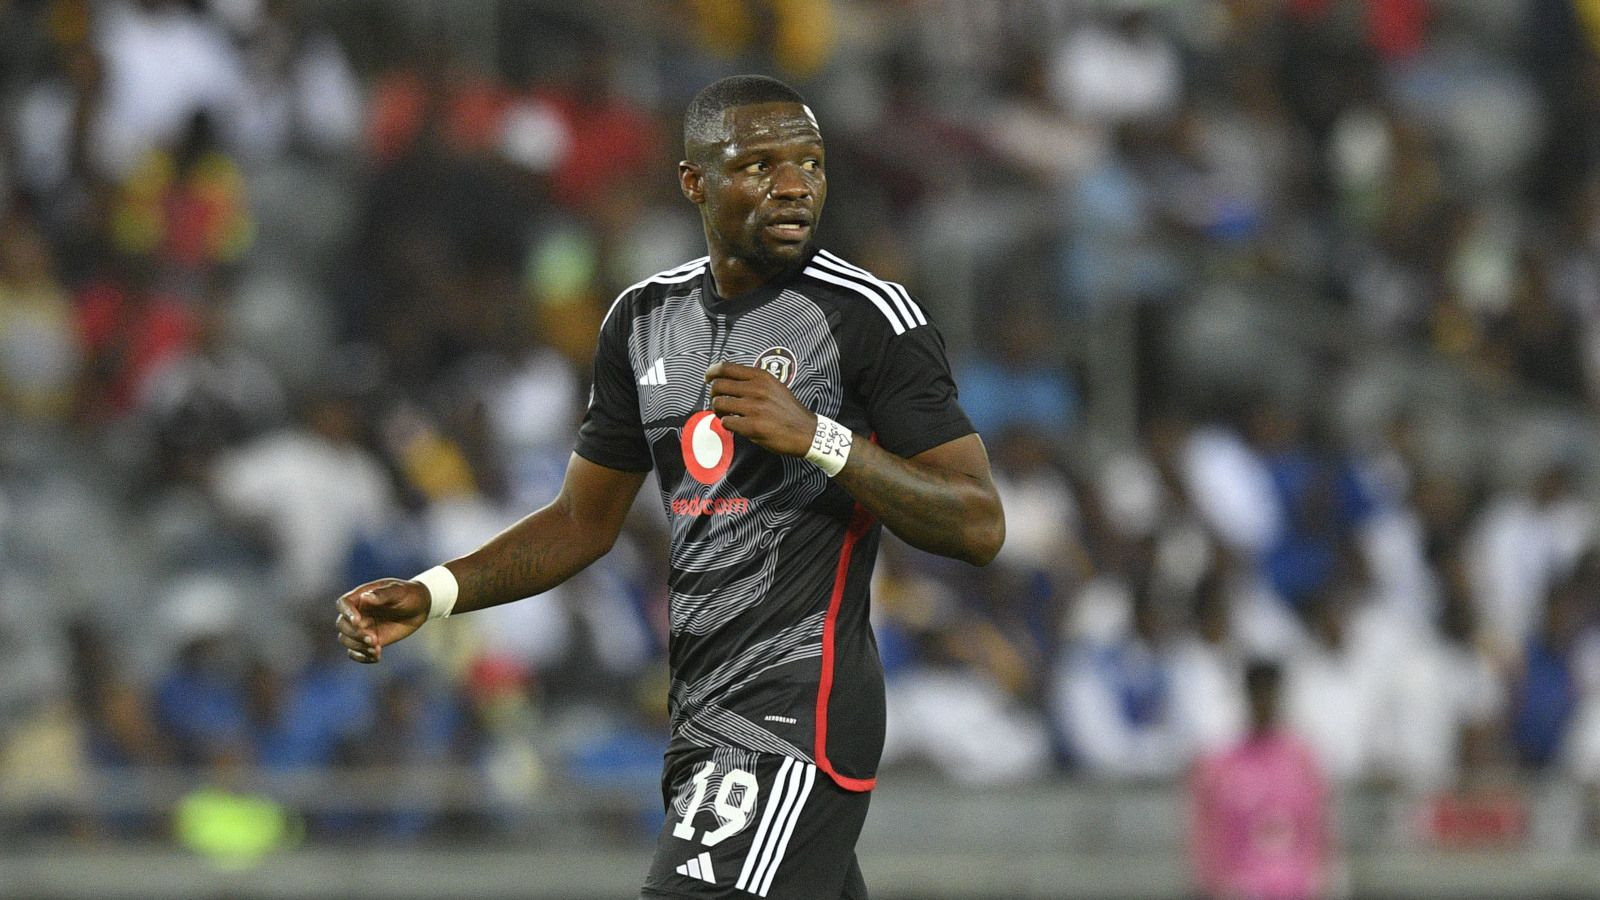 orlando pirates close gap on stellies with comfortable chippa win